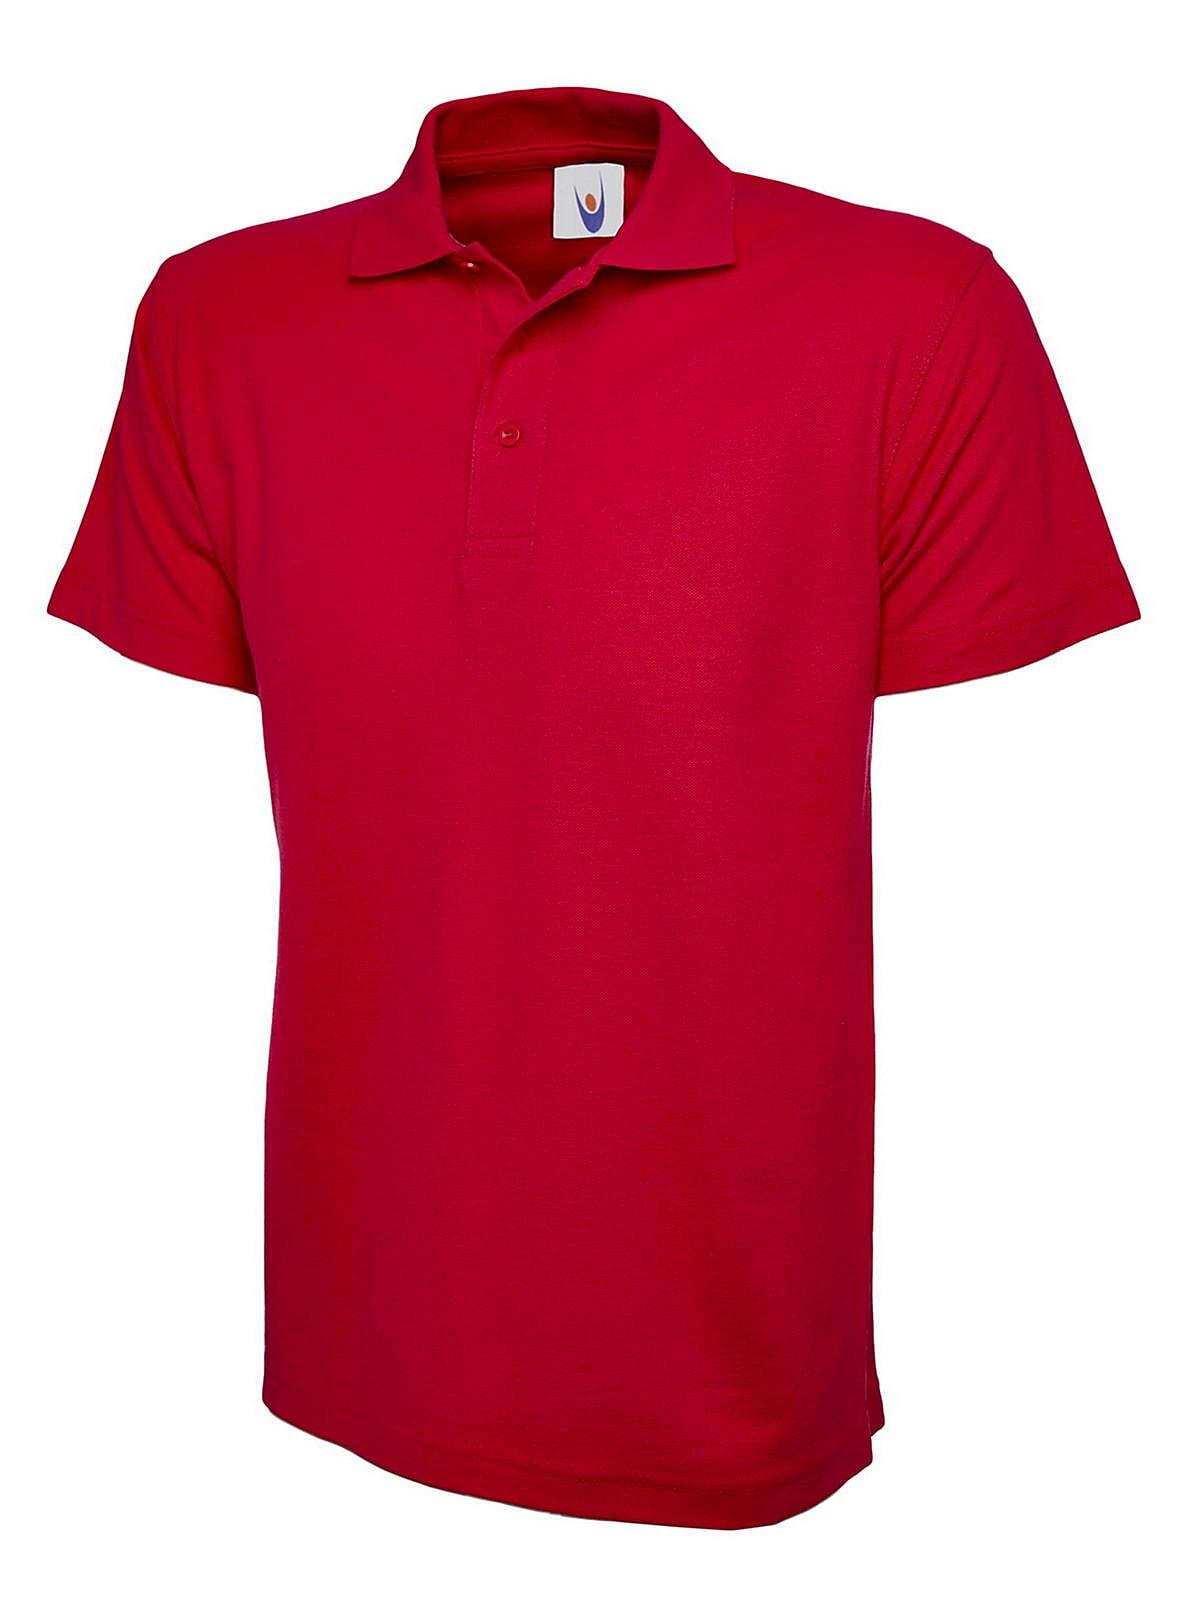 Uneek 220GSM Classic Polo Shirt in Red (Product Code: UC101)